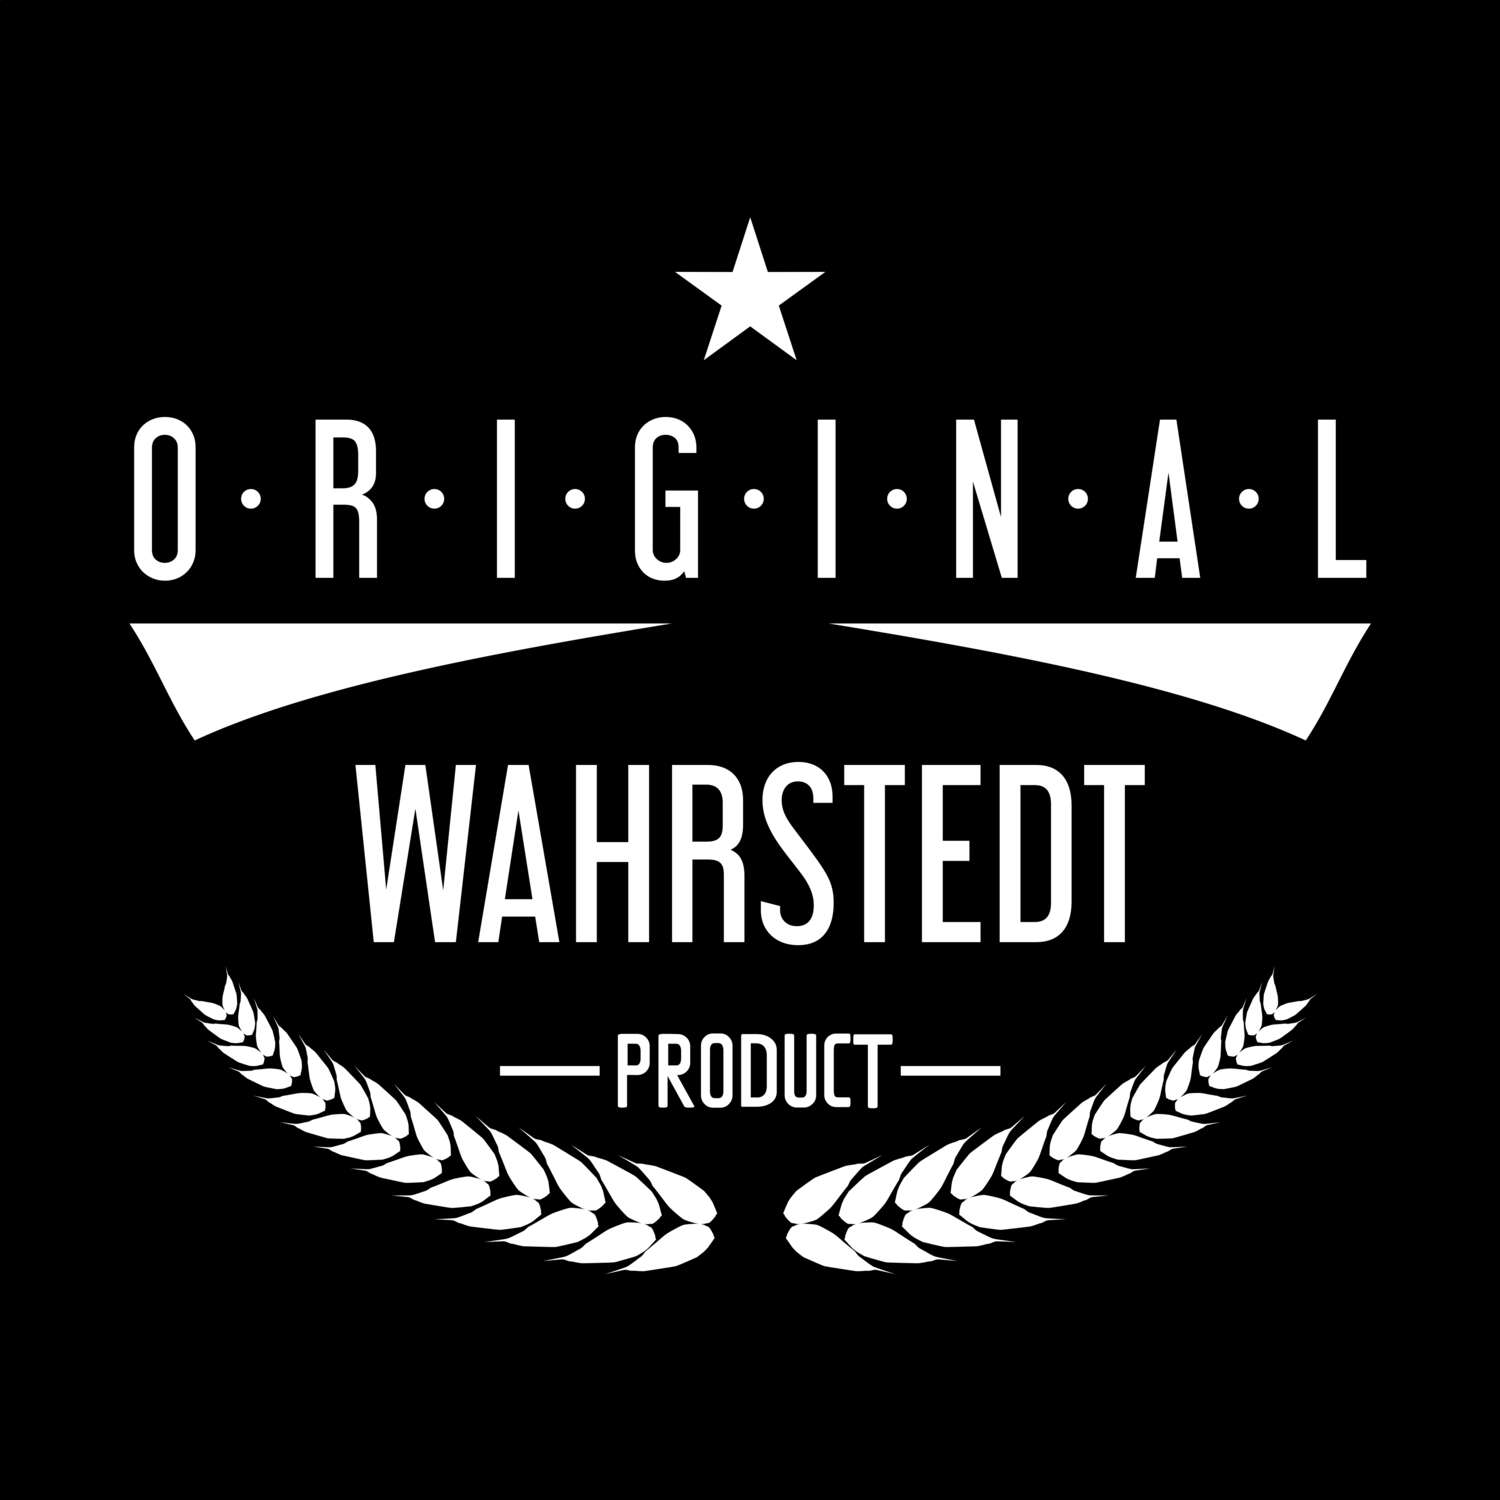 Wahrstedt T-Shirt »Original Product«